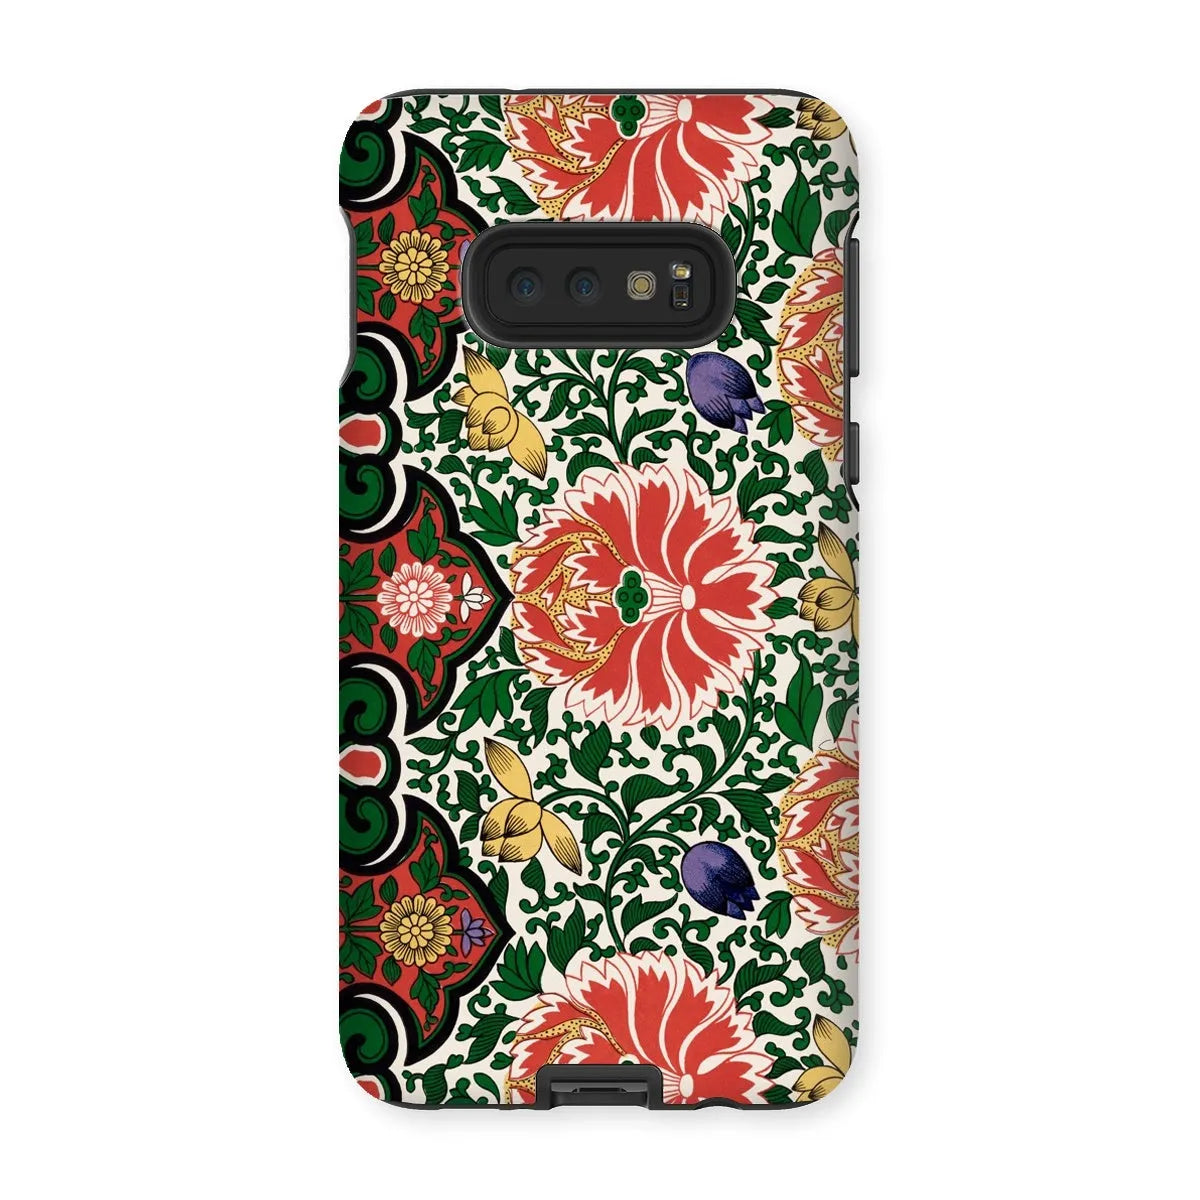 Chinese Floral Pattern Aesthetic Art Phone Case - Owen Jones - Samsung Galaxy S10e / Matte - Mobile Phone Cases